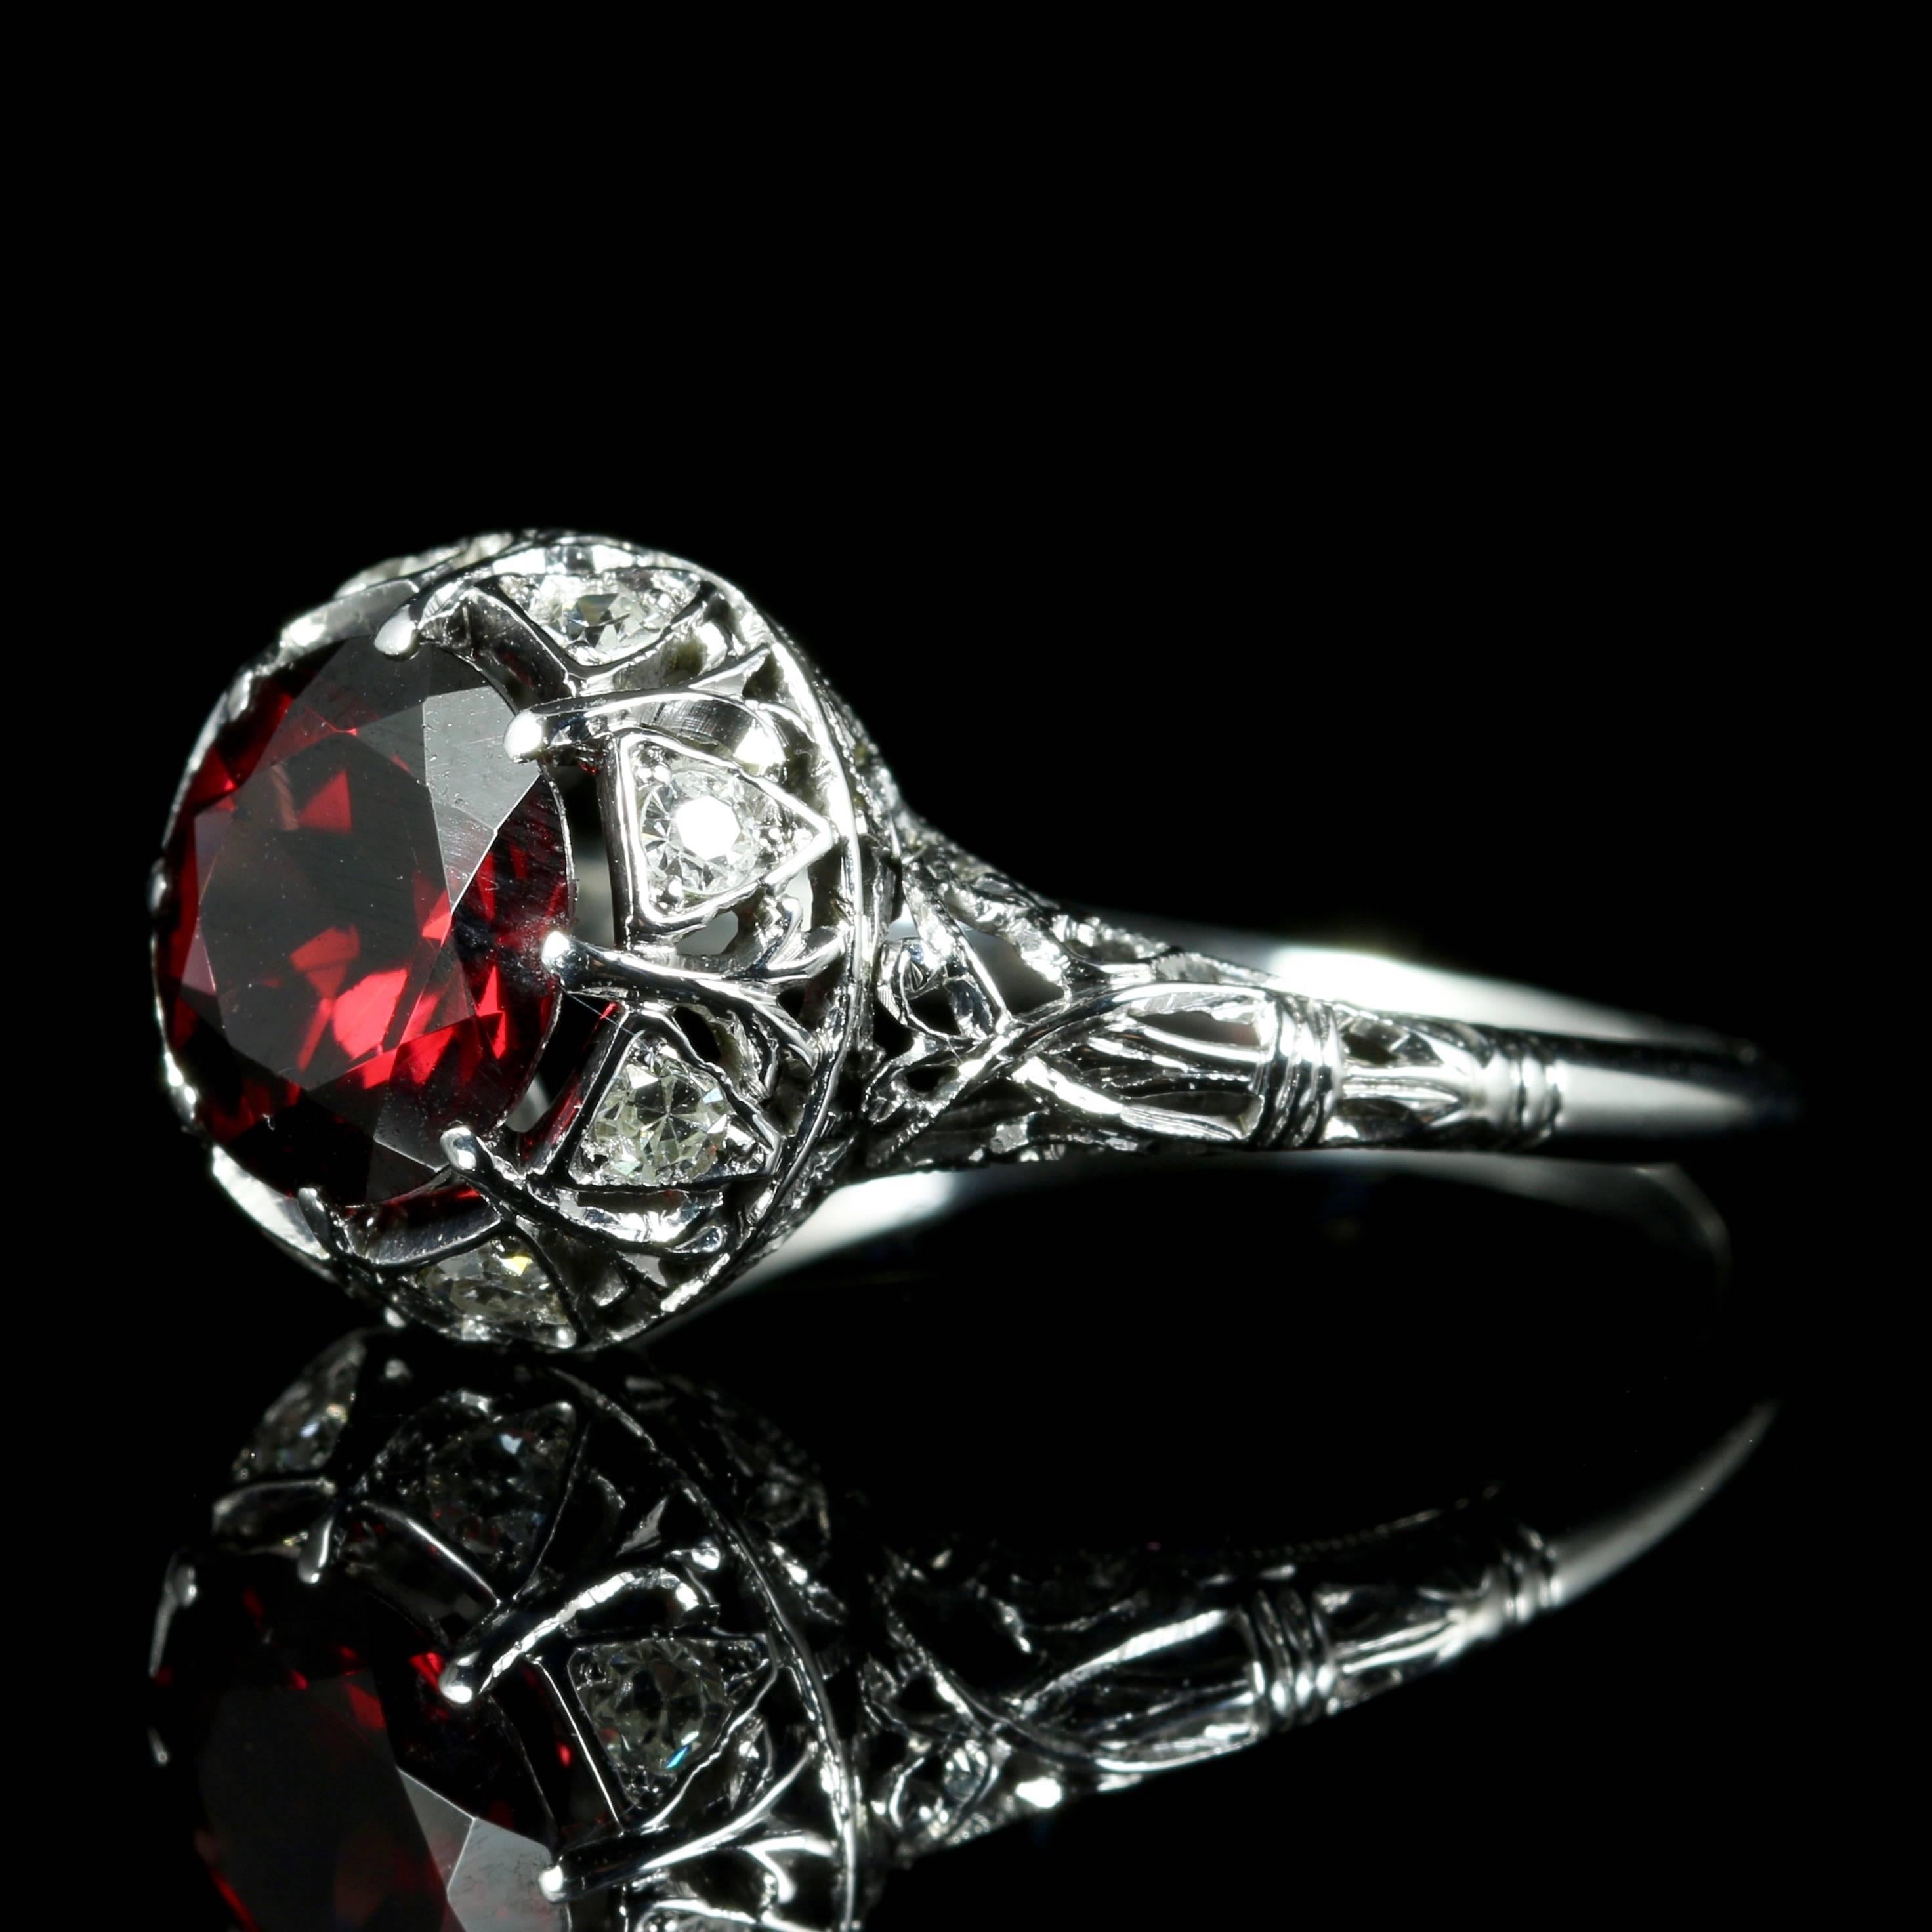 This fabulous Antique all platinum ring is Circa 1920.

Set with a deep red Garnet and old cut Diamonds which are set into the gallery of the ring.

The Antique ring has been tested as platinum.

The lovely deep red natural Garnet has a lovely red